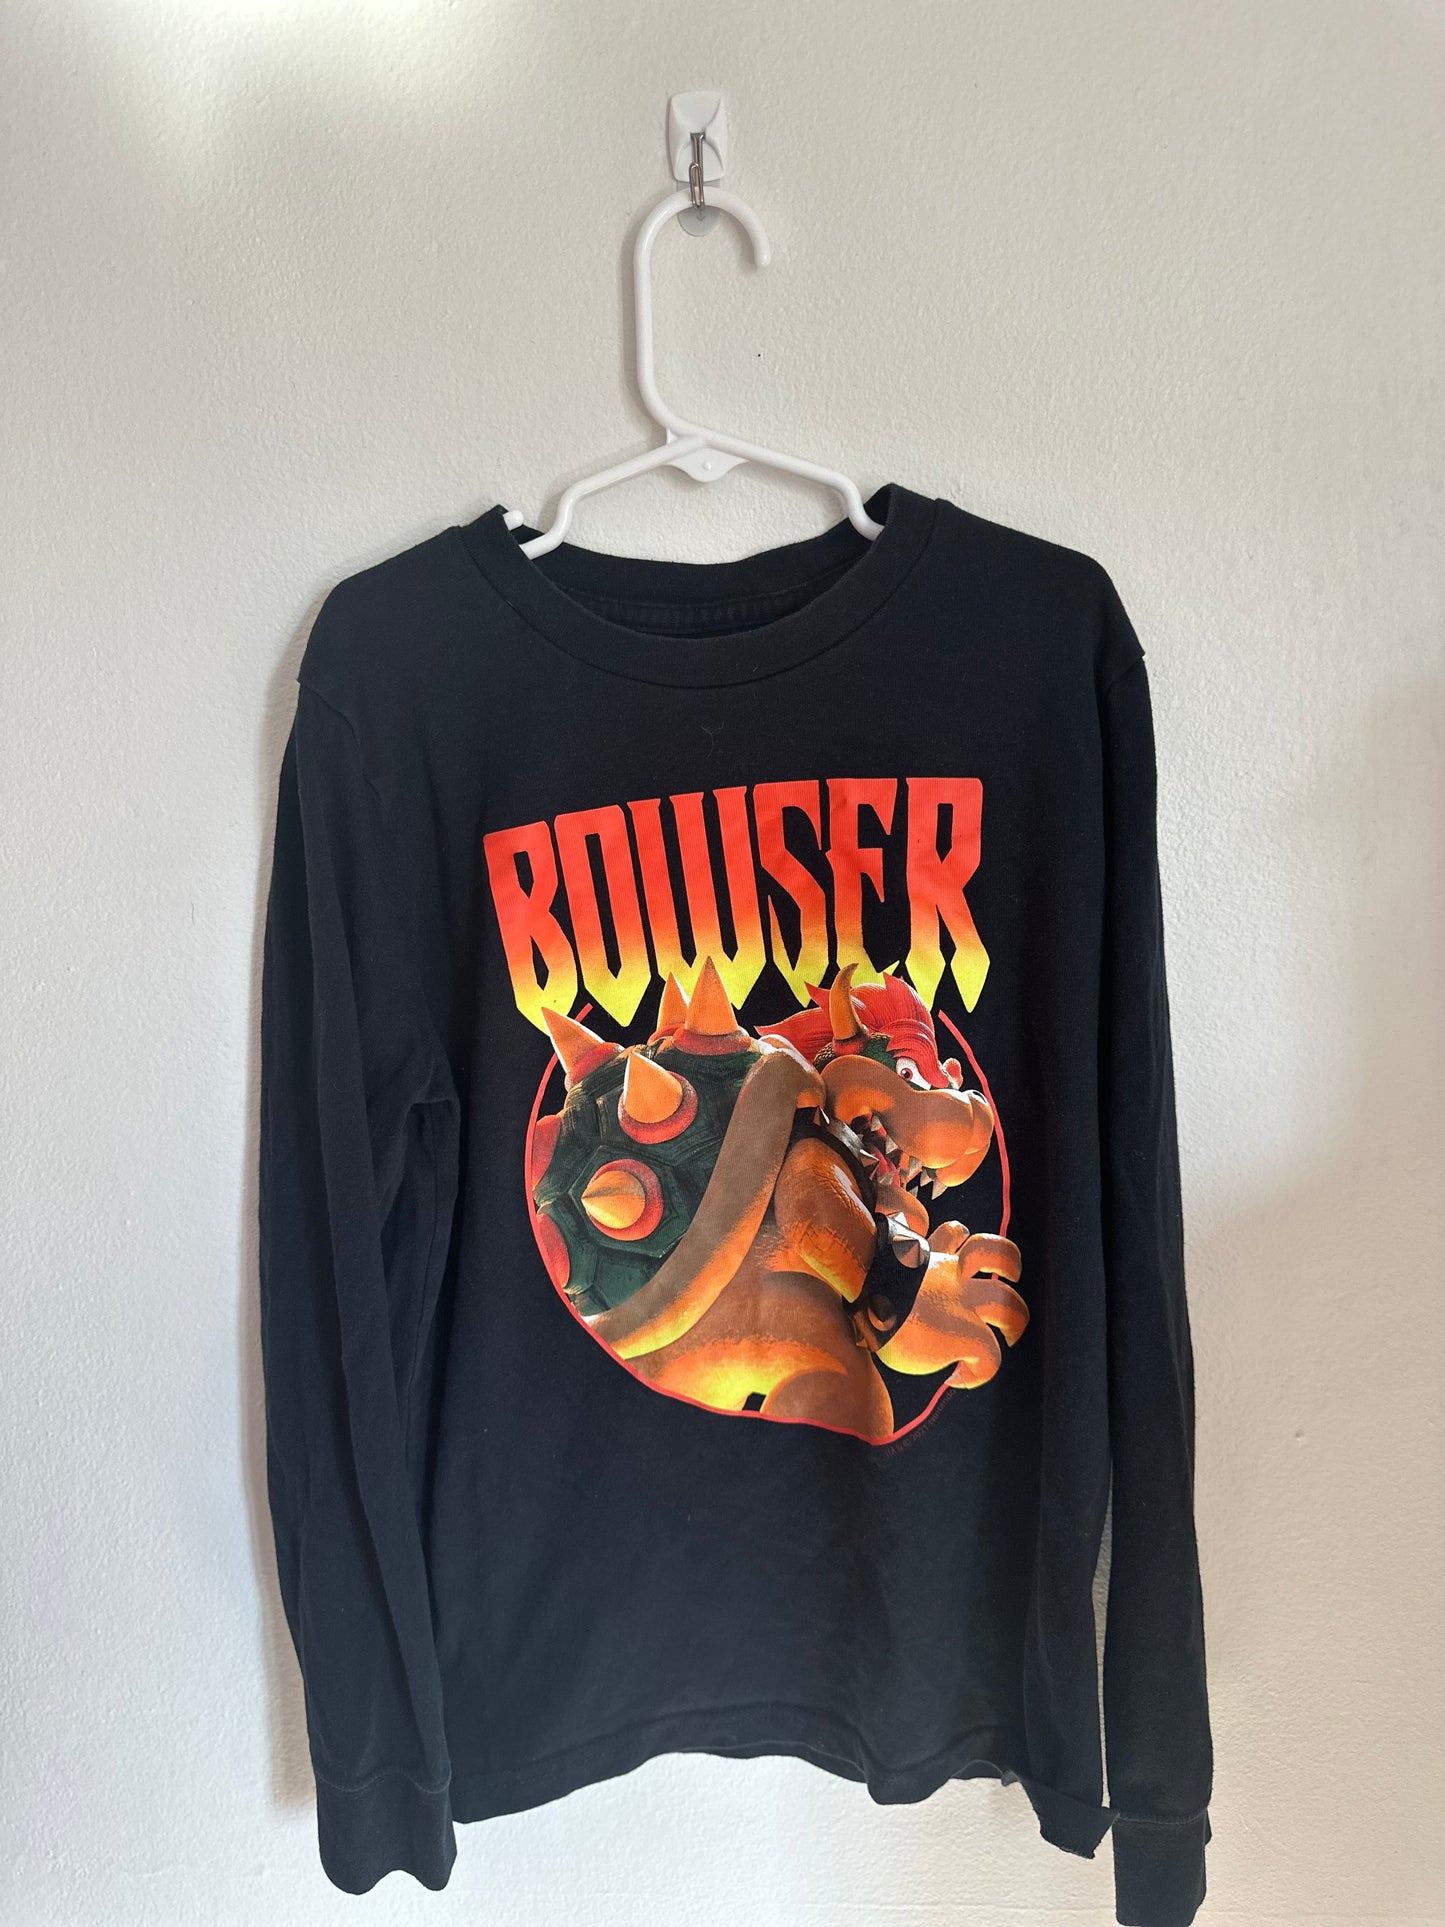 Abercrombie and Fitch Boys 9/10 Bowser Long Sleeve